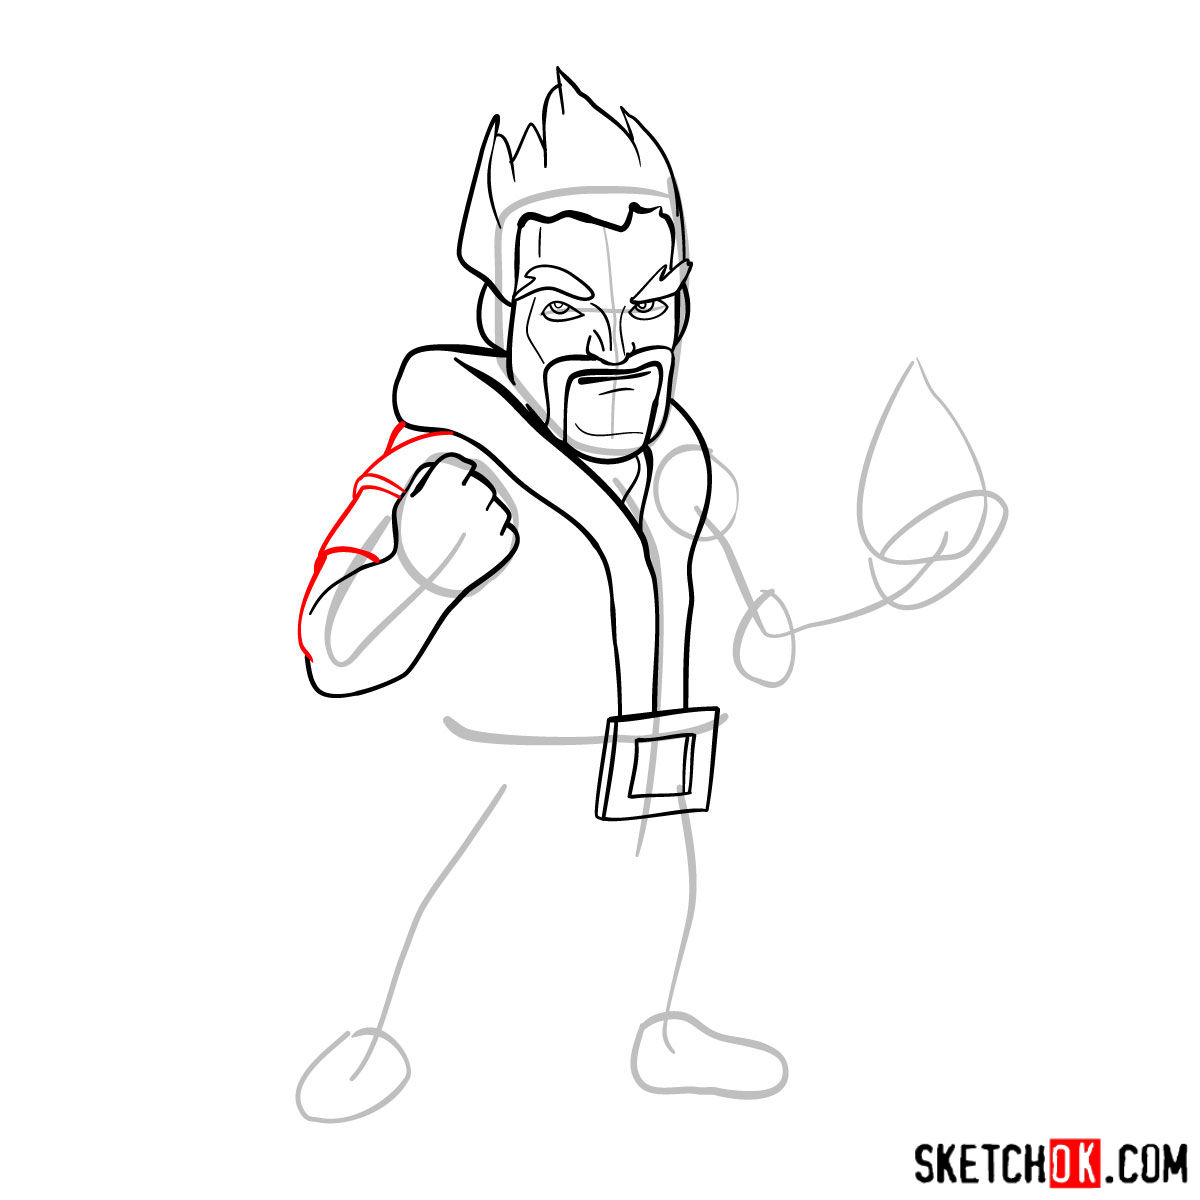 How to draw Ice Wizard from Clash of Clans - step 07